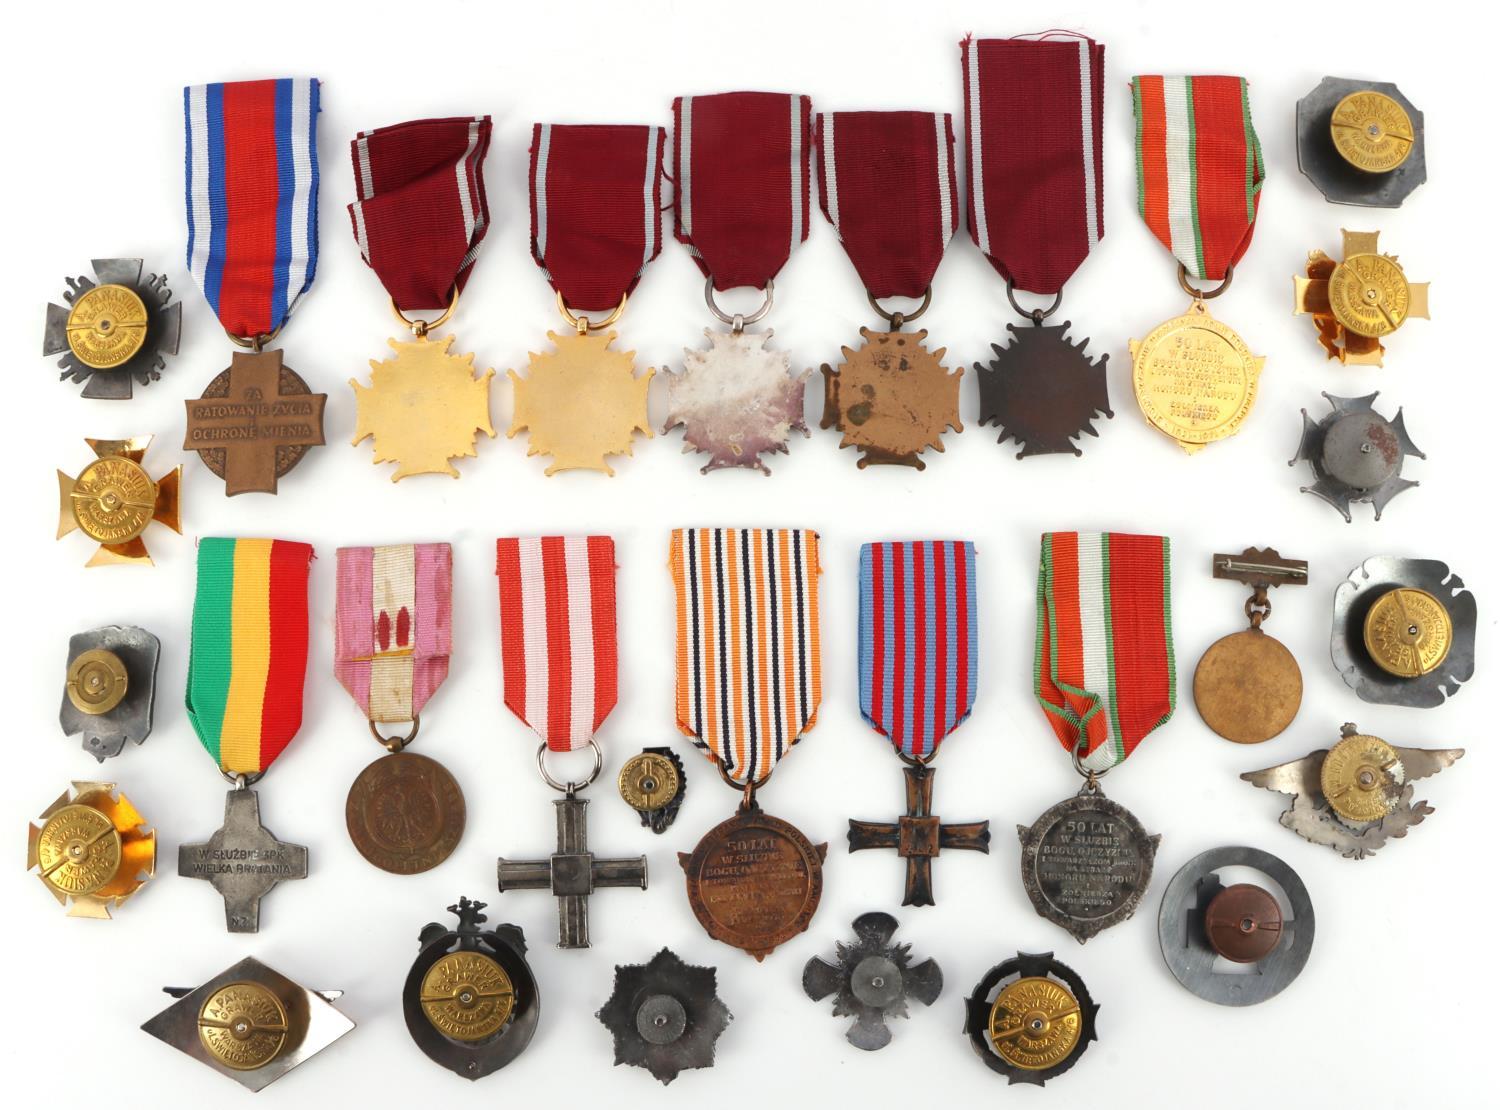 30 WWI TO POST WAR POLISH MILITARY REGIMENT MEDALS